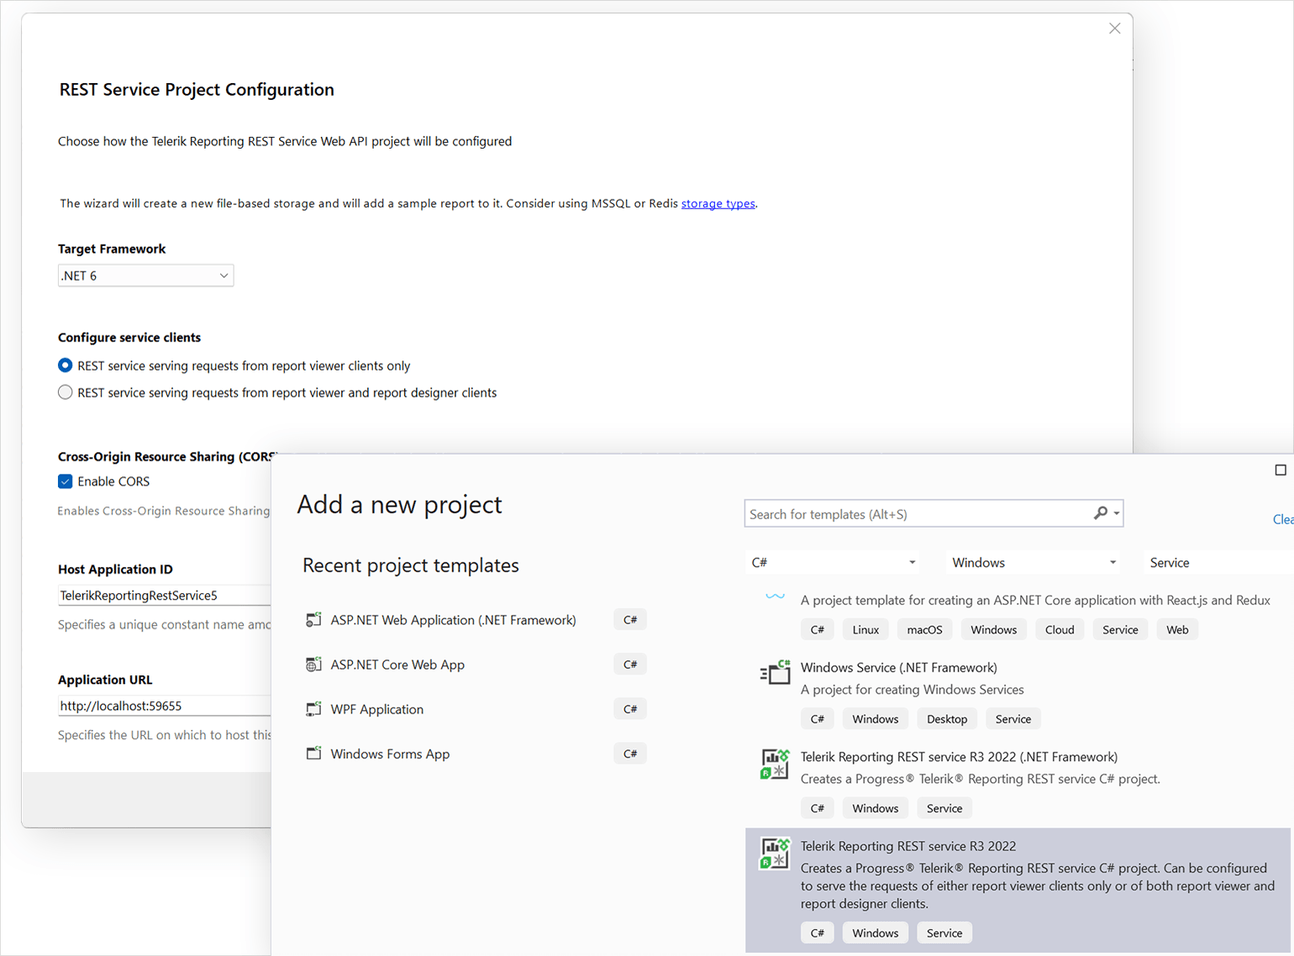 Visual Studio Project Template Creating a .NET Core+ Web Application with REST Reports Service